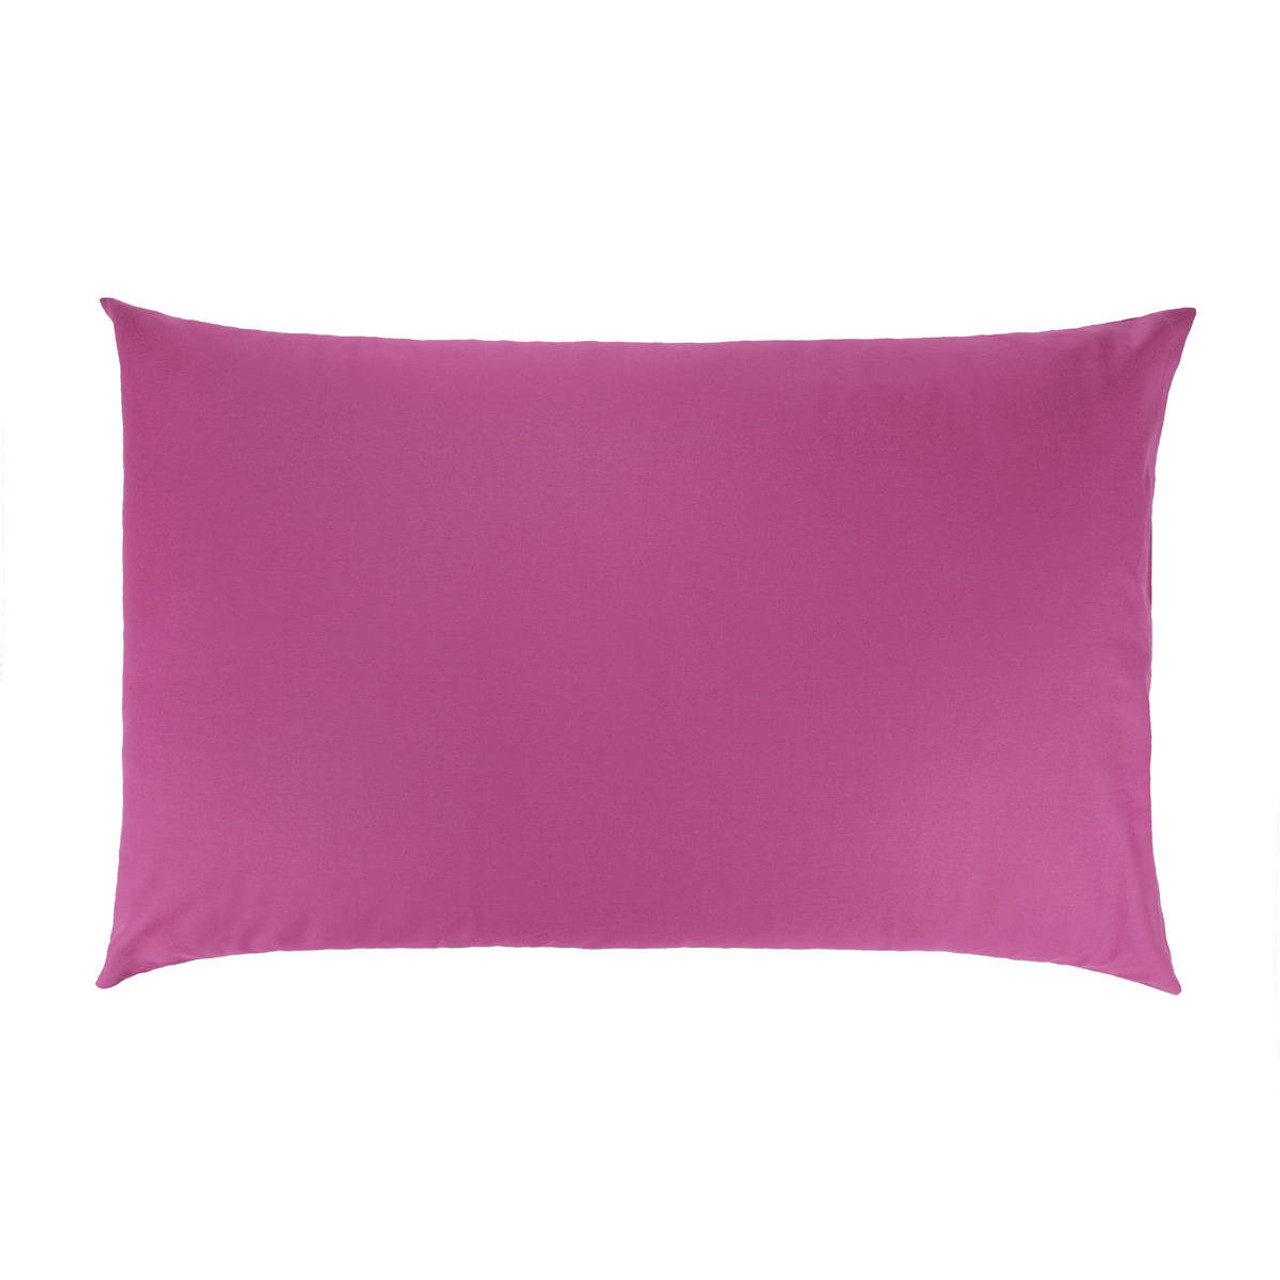 Nightzone Pair of Plain Dyed PolyCotton Pillowcases Pillow Cases Burgundy/Wine by Nightzone 